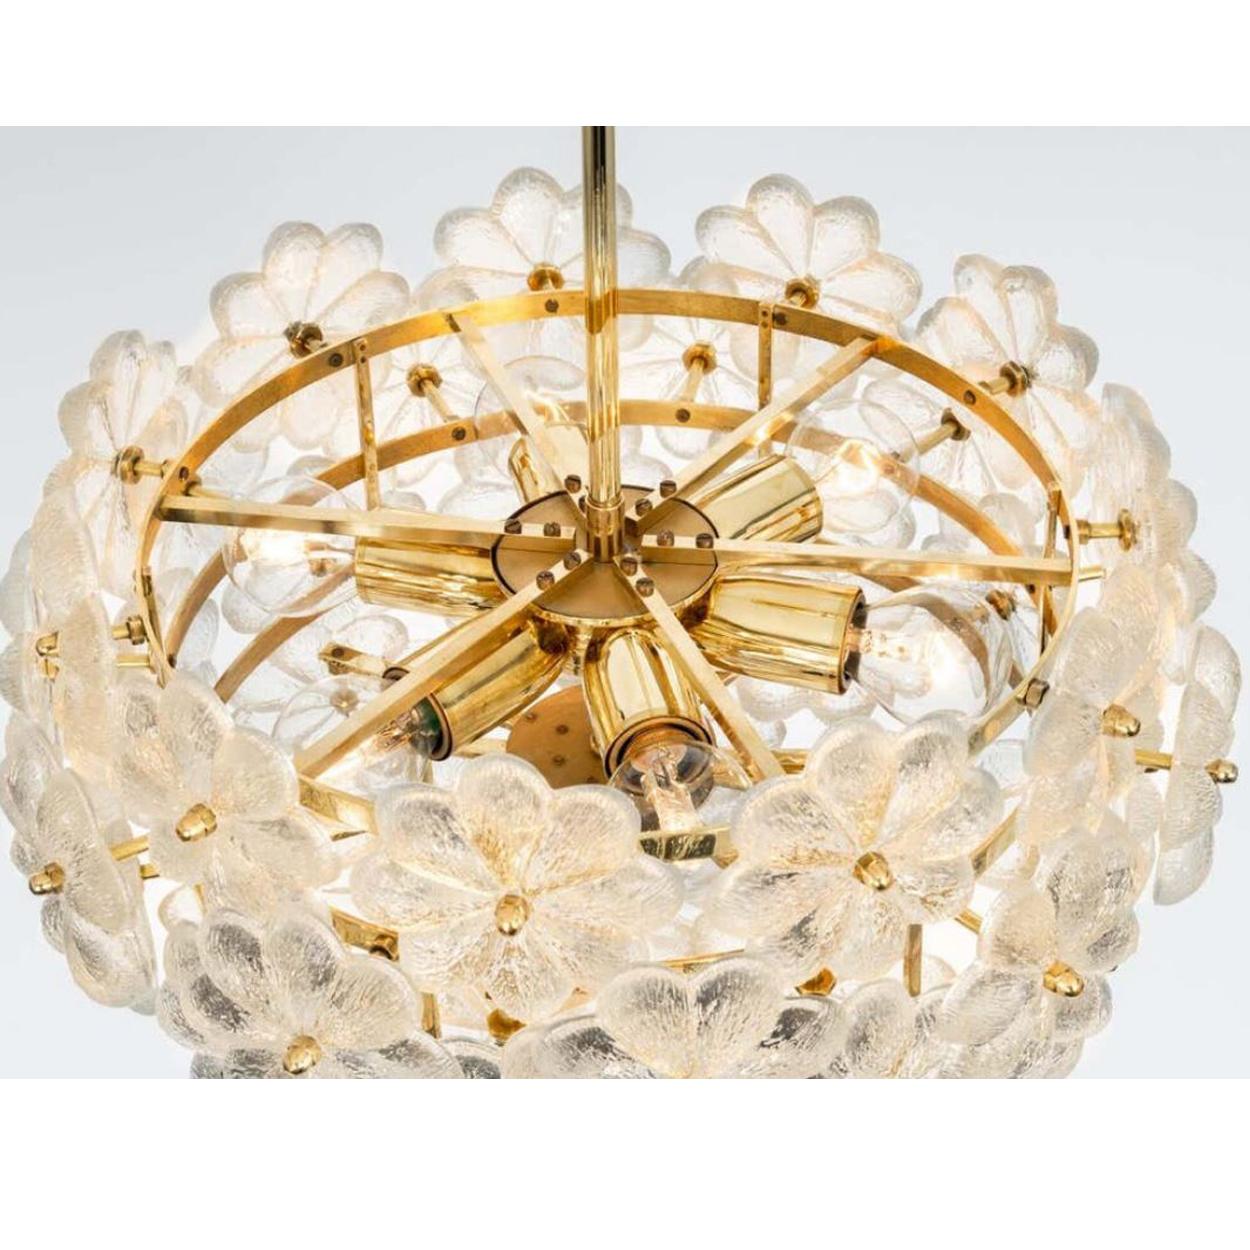 Large stunning chandelier with crystal flower glass over a brass frame, made by Ernst Palme in Germany, 1970s.

High quality and in very good condition. Cleaned, well-wired and ready to use.

The chandelier requires 6 x E14 small bulbs with 40W max